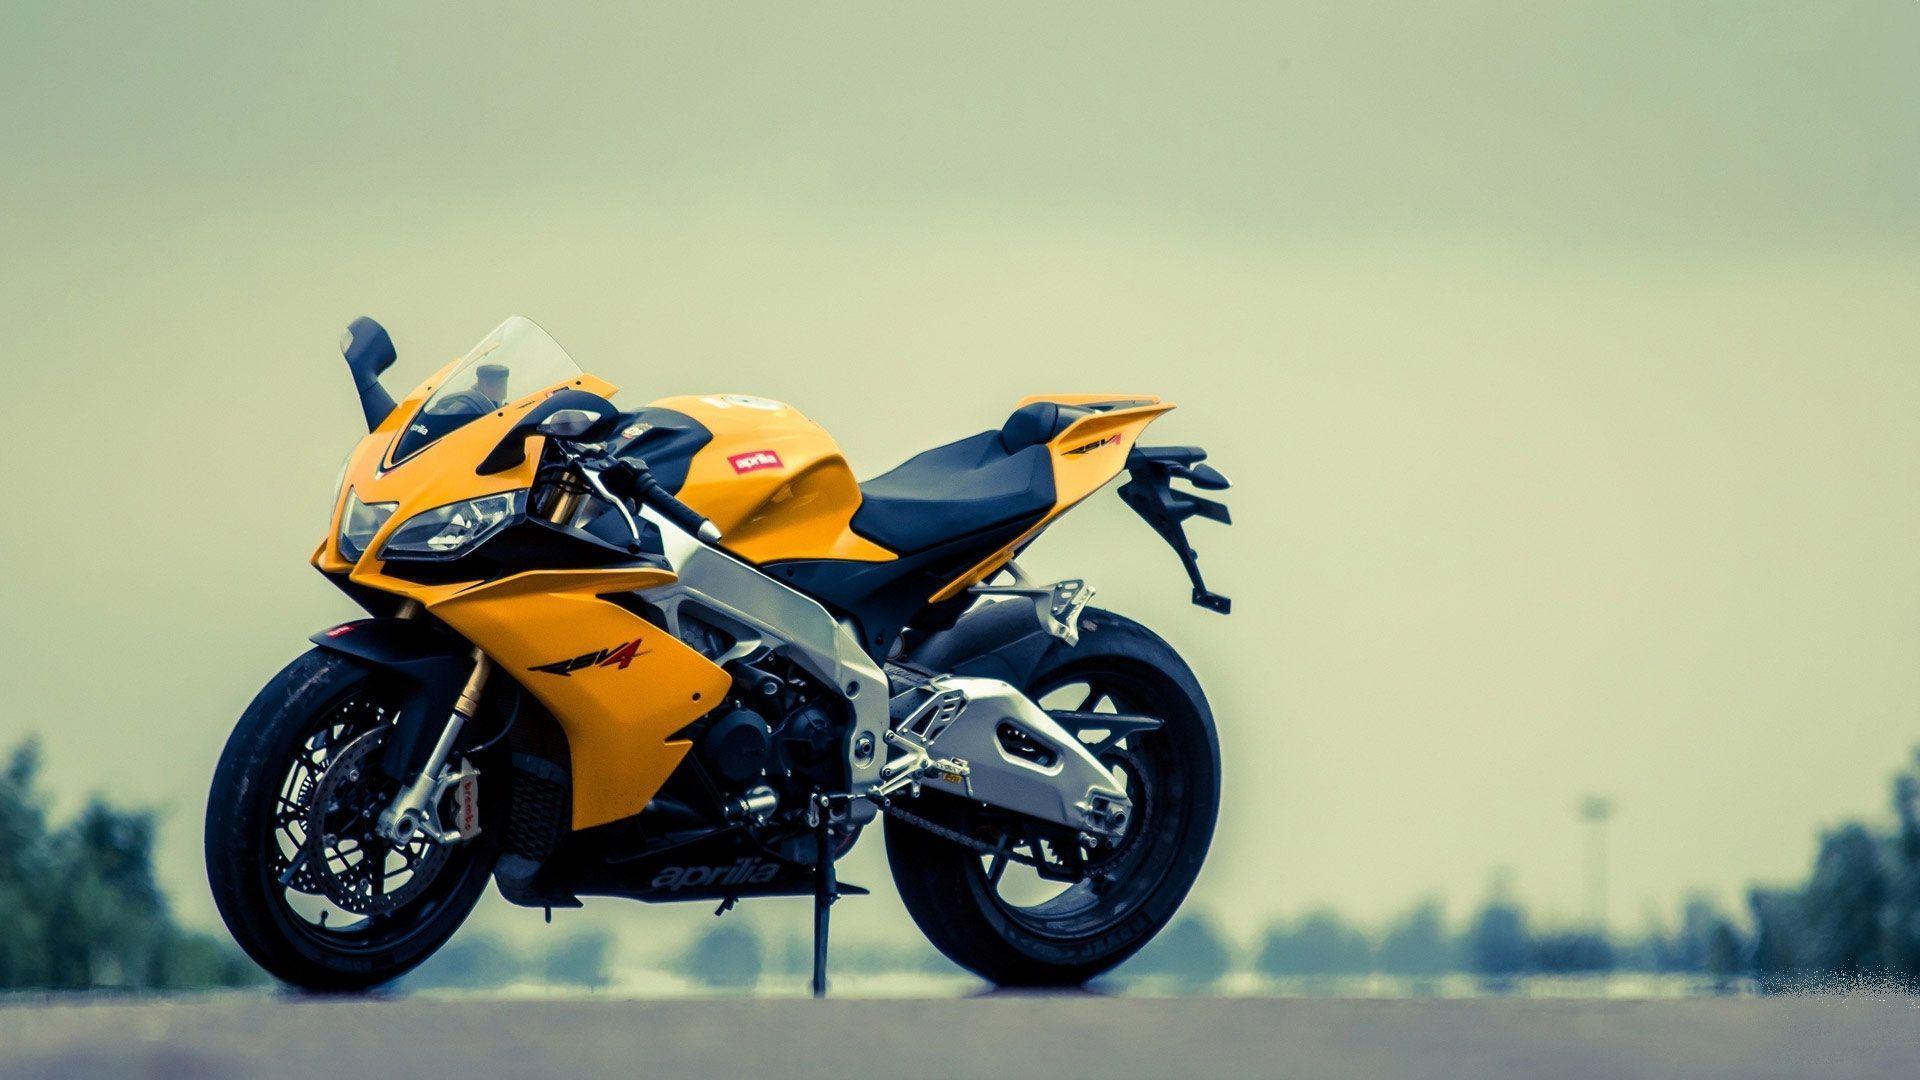 Sports Bike Wallpapers For Mobile Phones